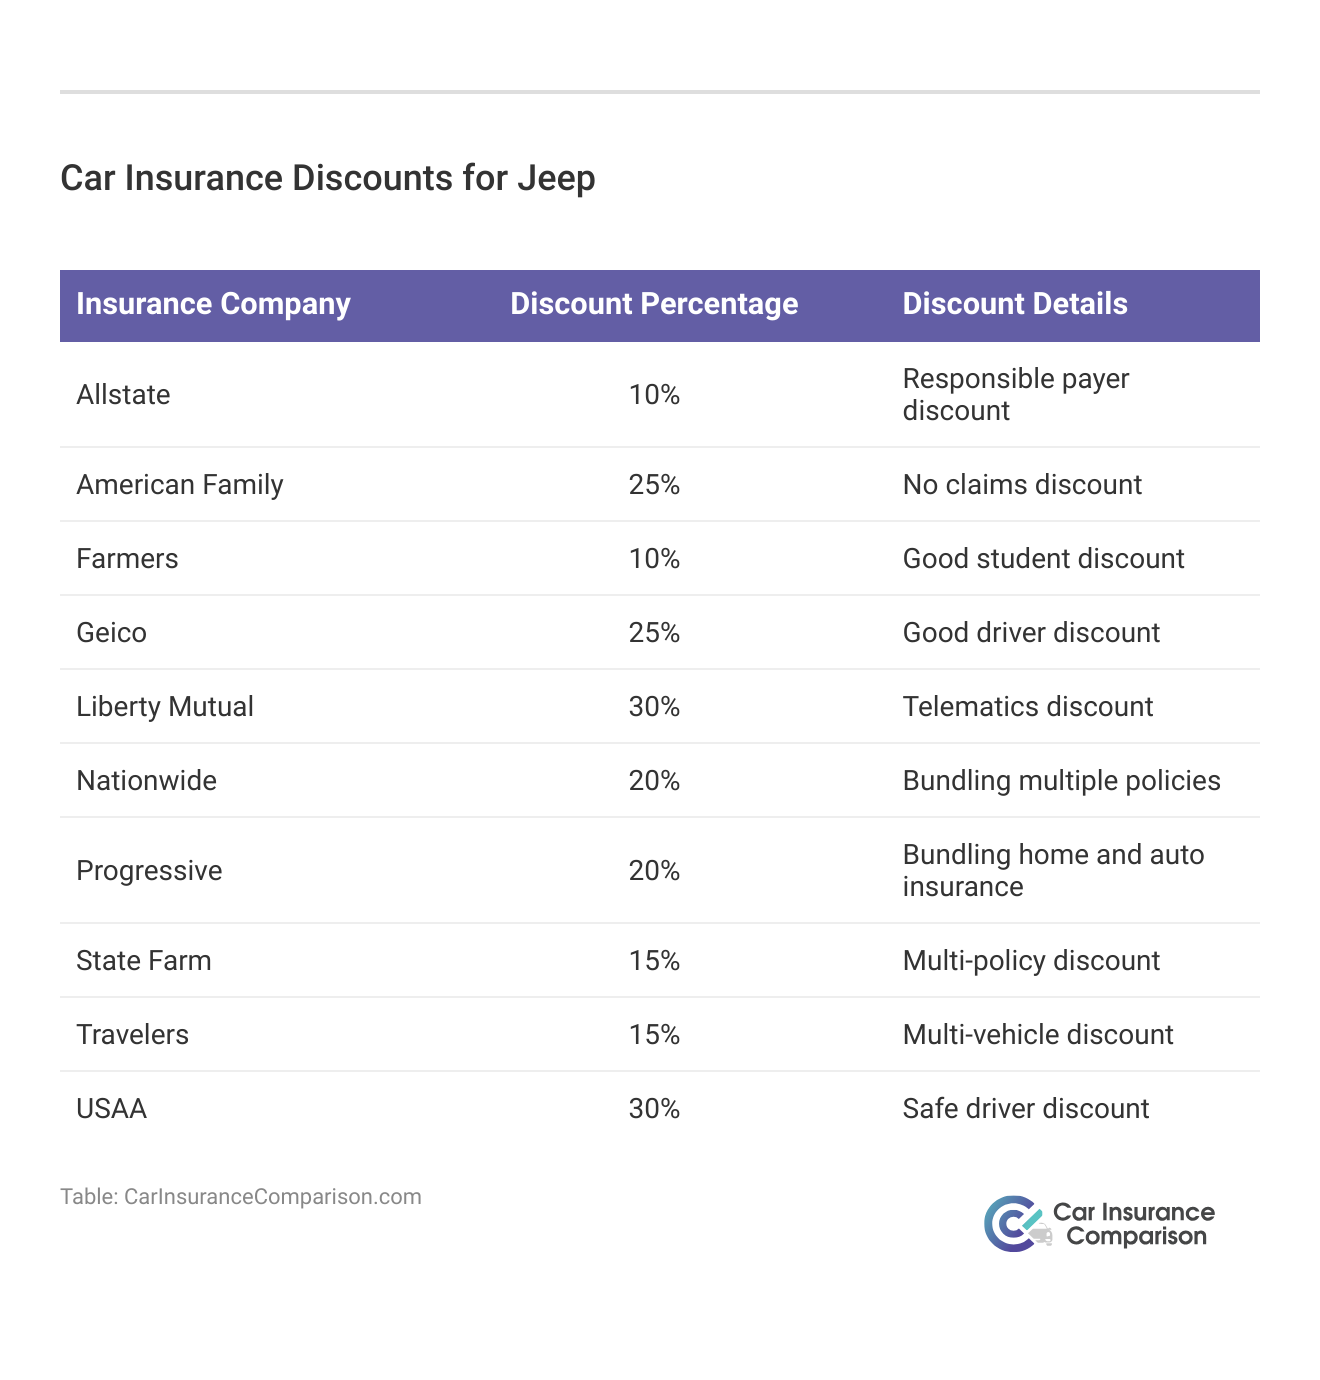 <h3>Car Insurance Discounts for Jeep</h3>